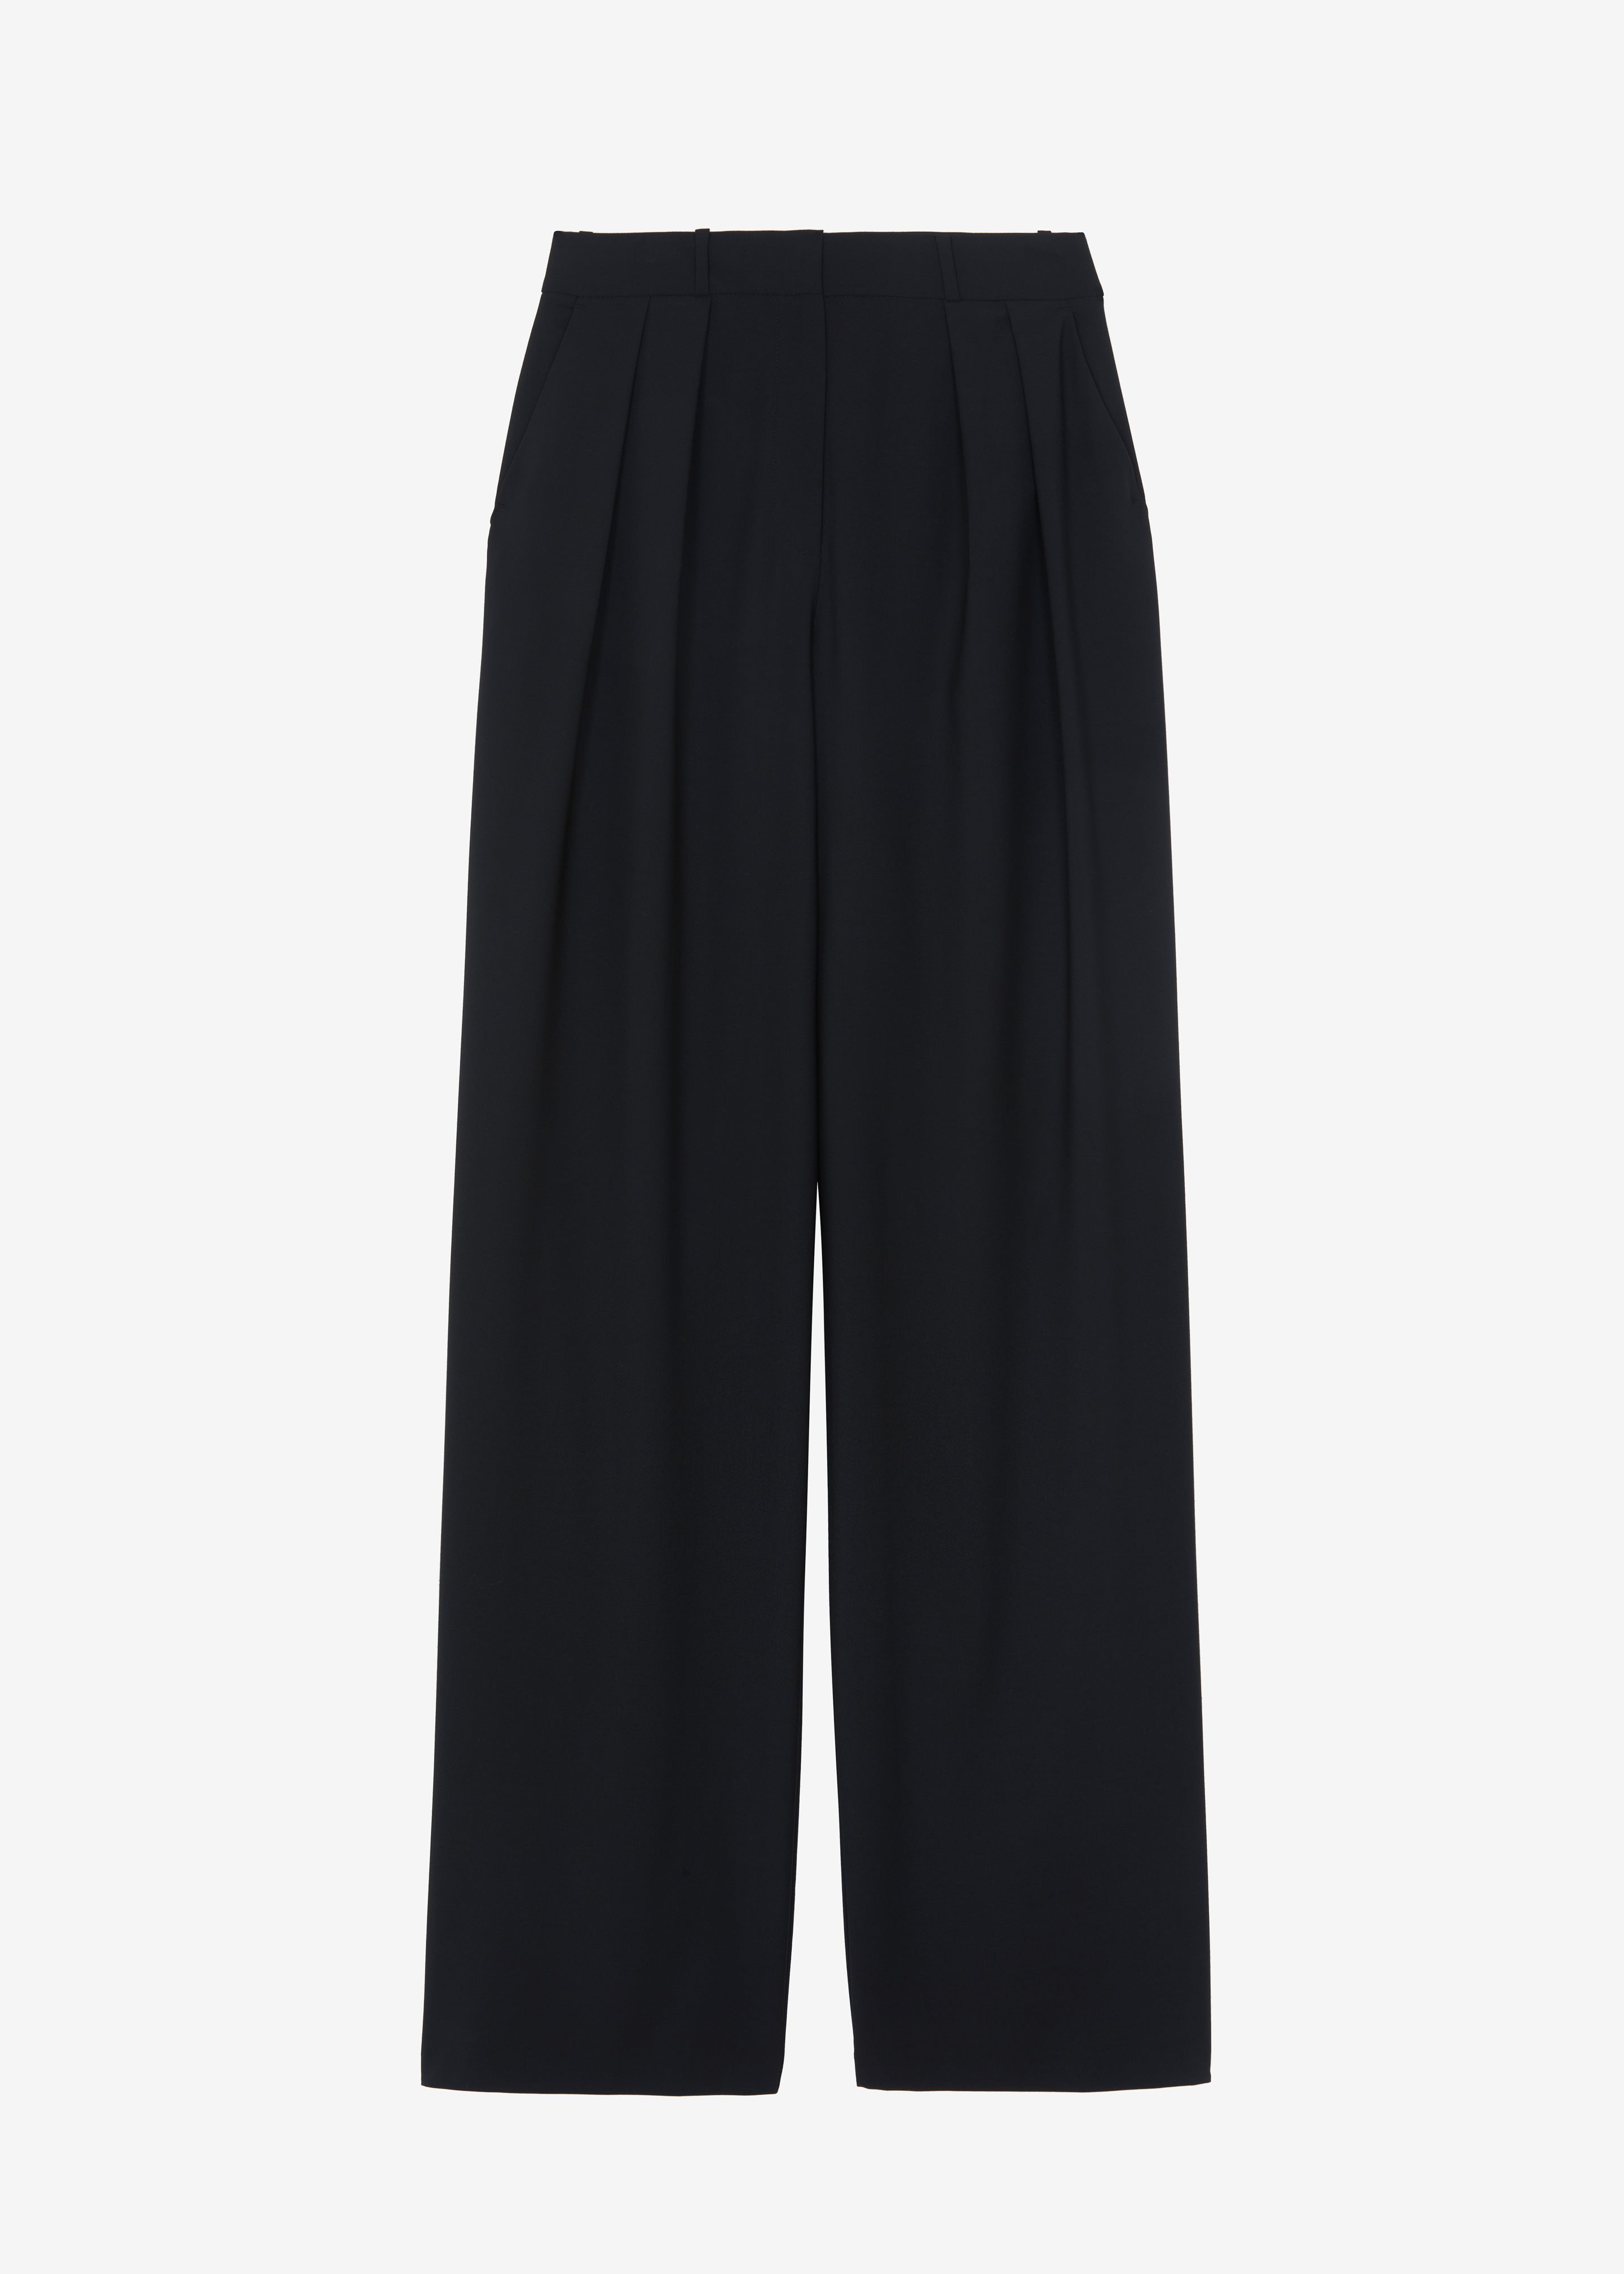 Ripley Pleated Trousers - Black - 9